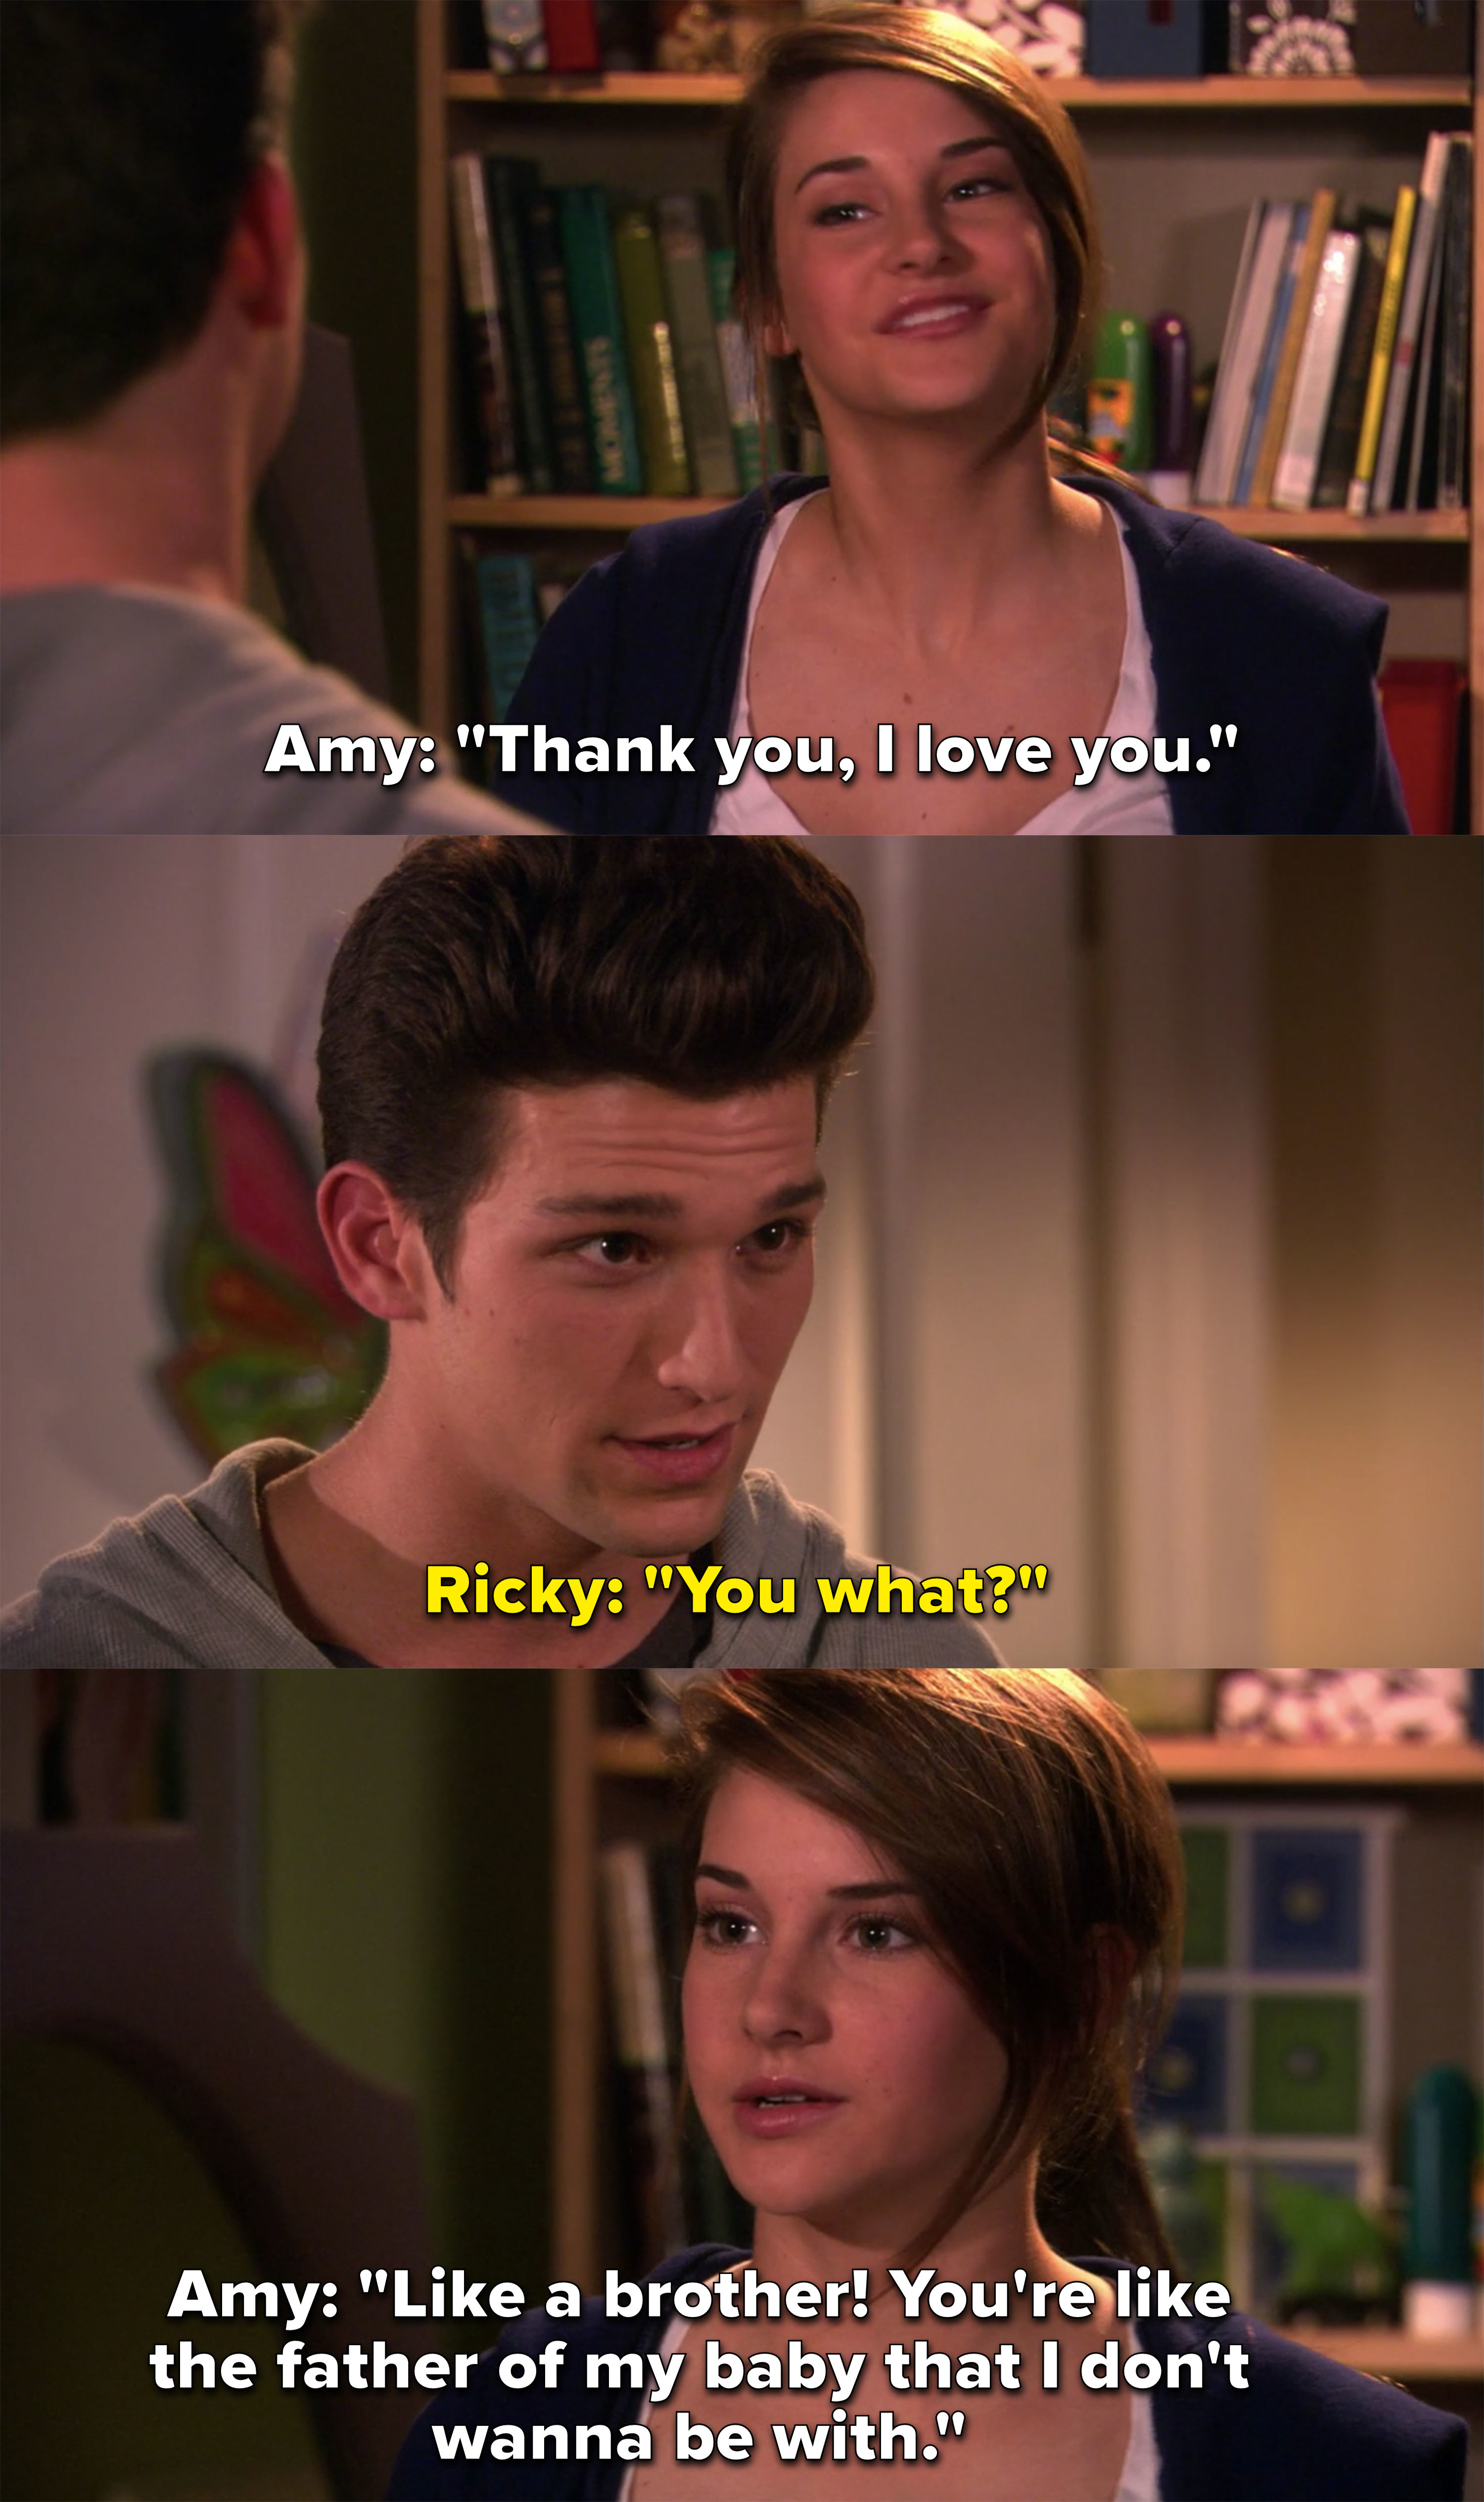 Amy says she loves Ricky like a brother and the father of her baby she doesn&#x27;t want to be with